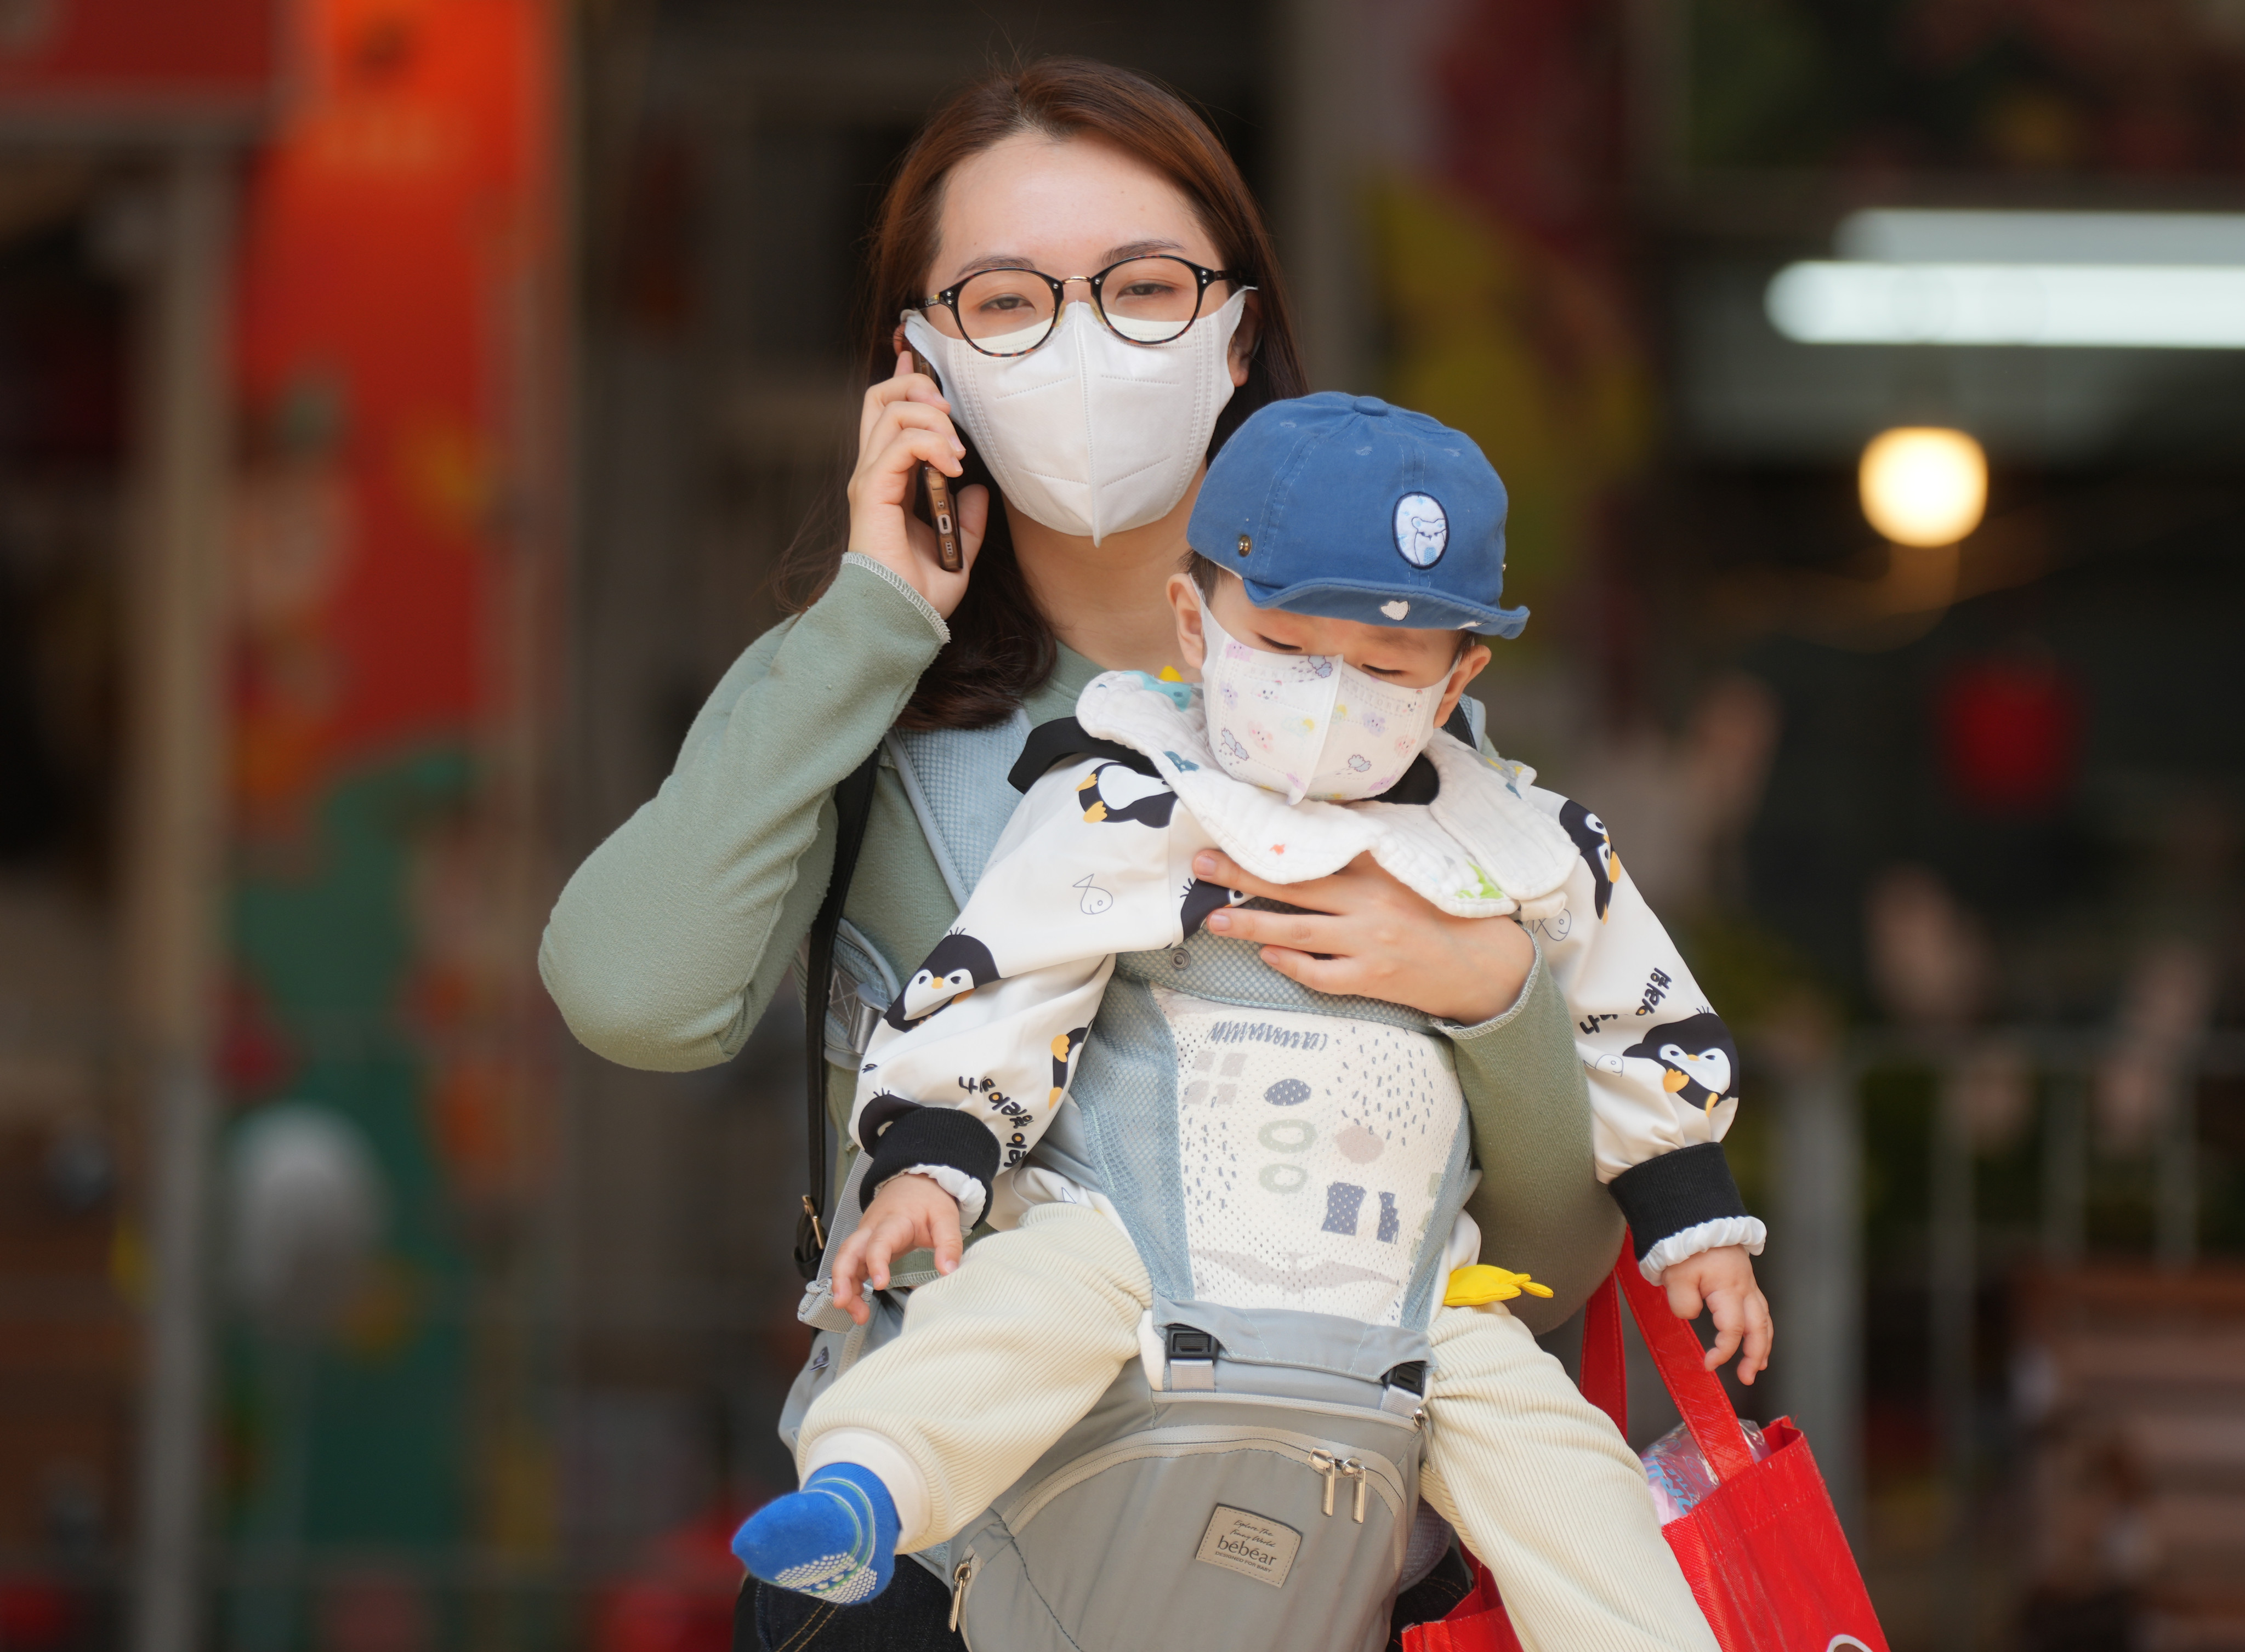 Paediatricians have warned of an uptick in cases of the flu and other respiratory infections among children in Hong Kong. Photo: Sam Tsang